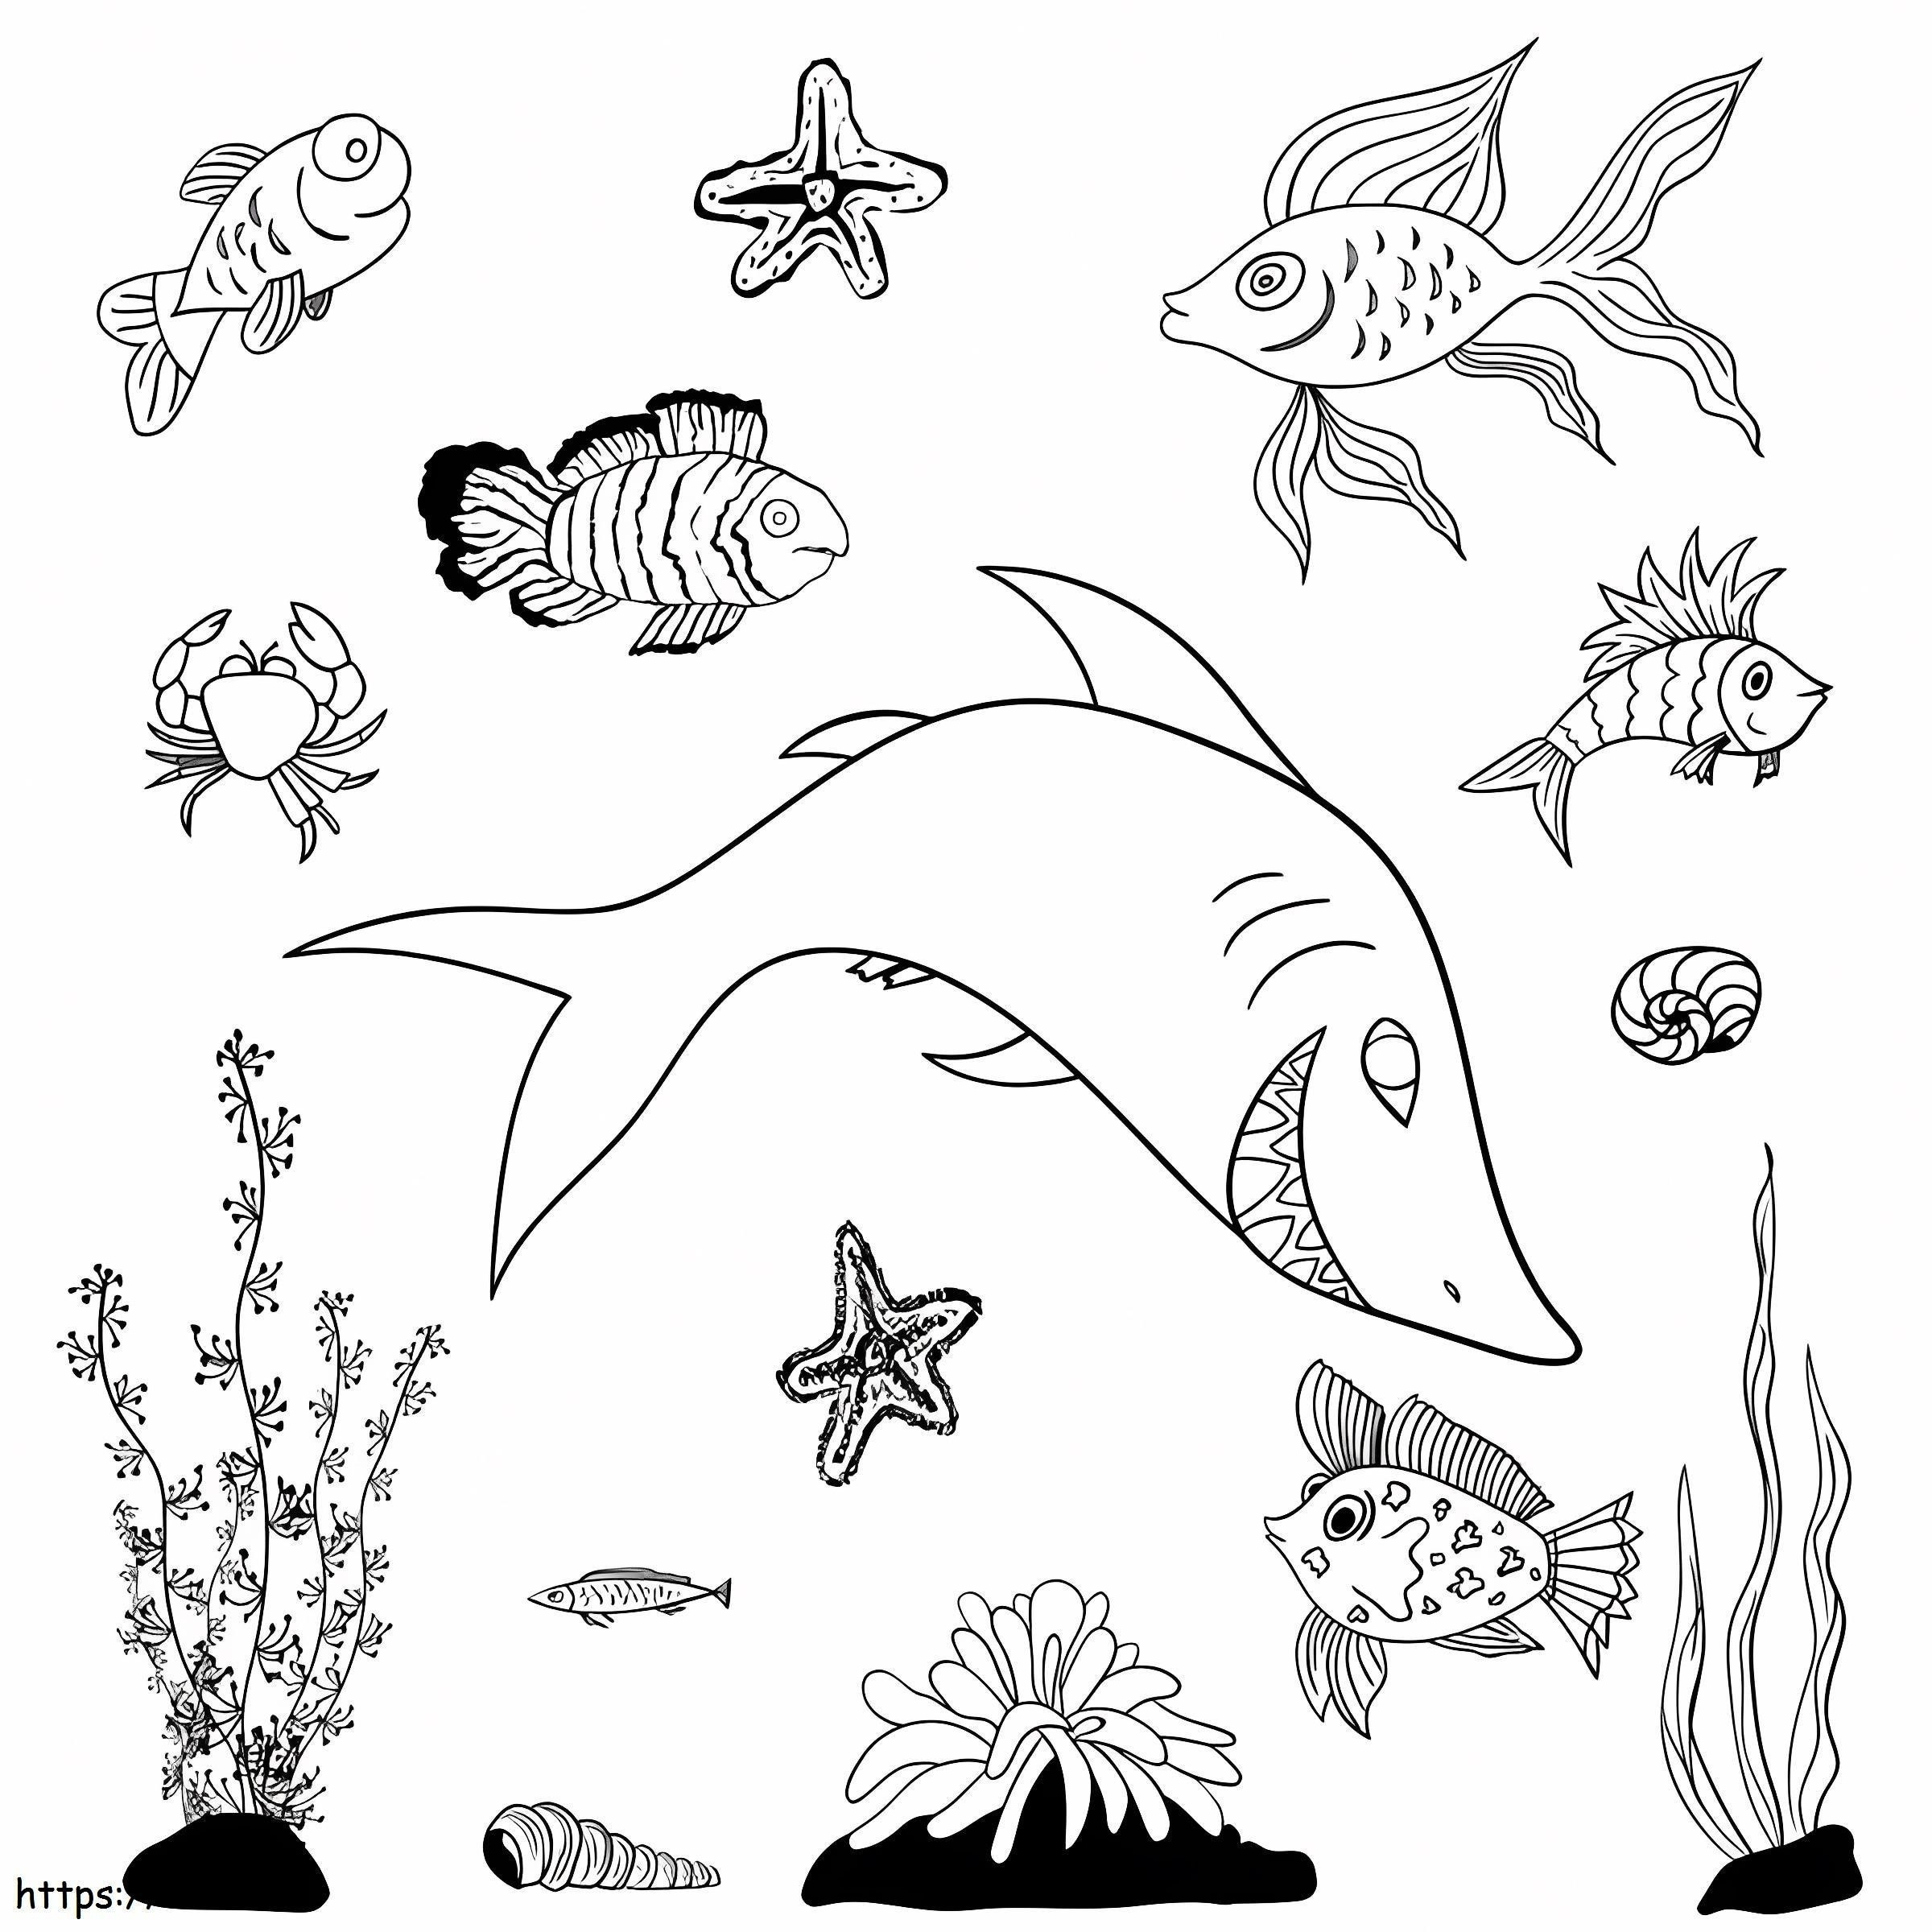 Scary Shark With Fish coloring page